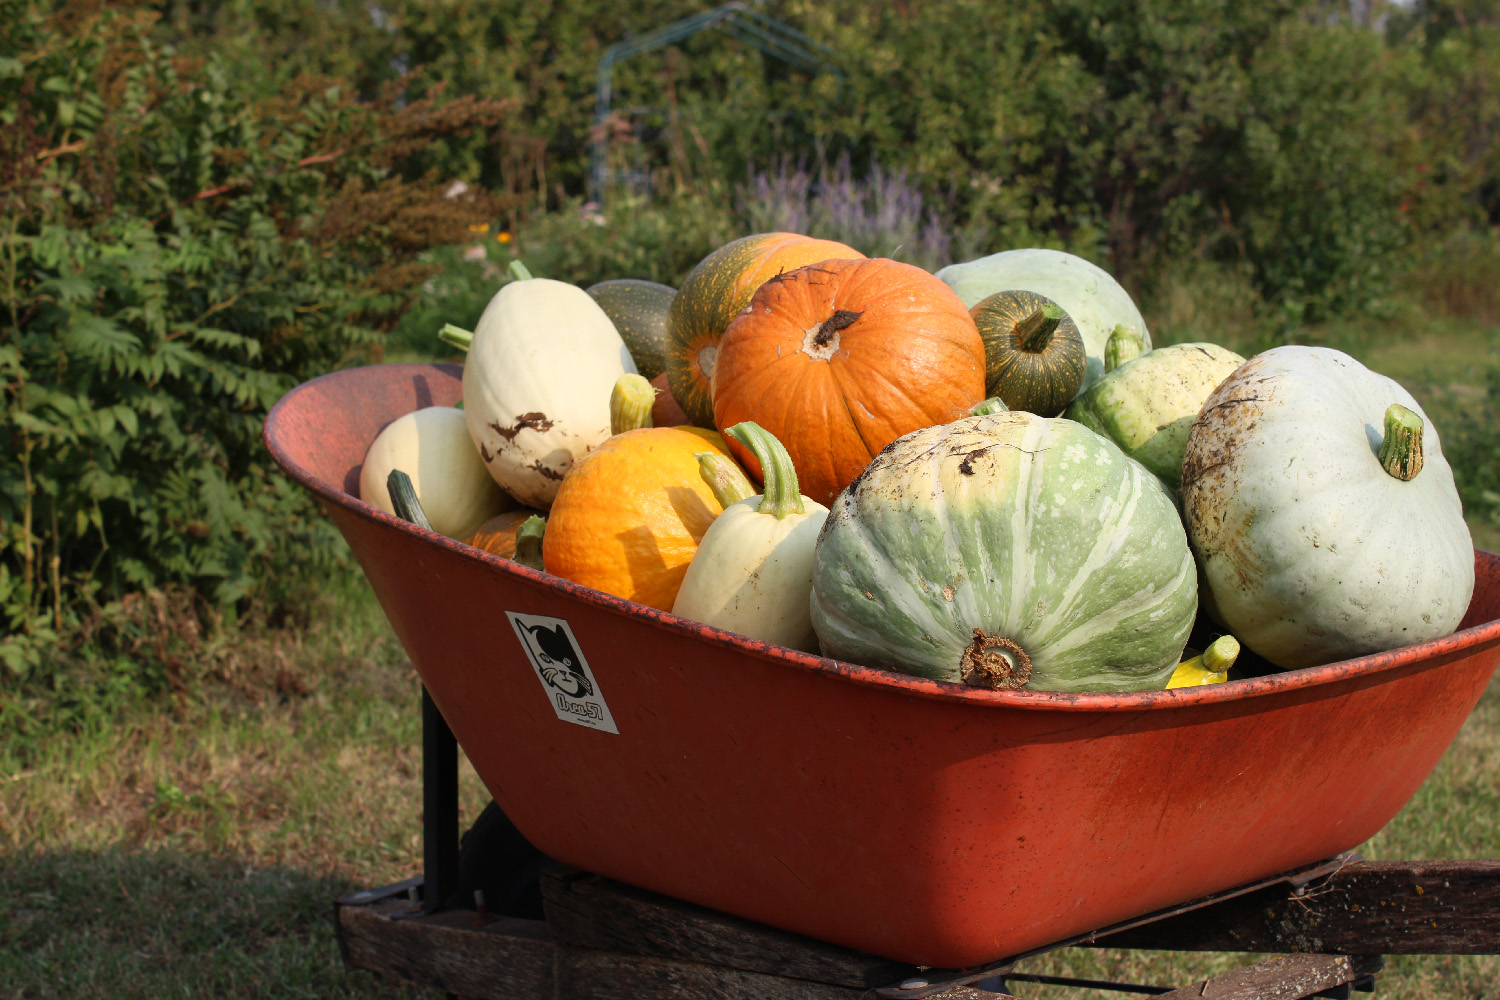 An orange wheelbarrow full of different sizes, shapes, and colors of squash.